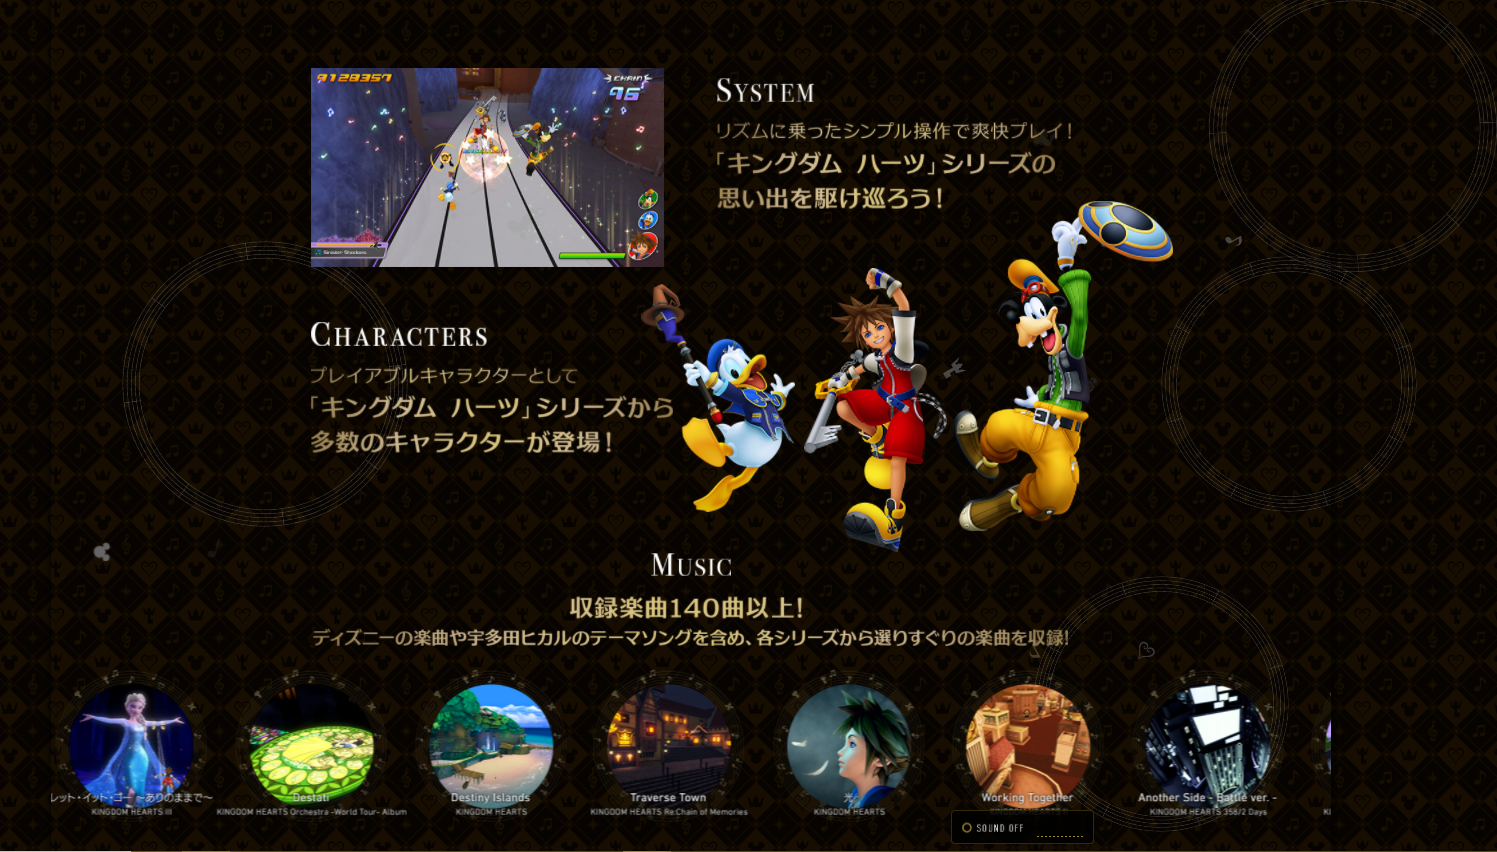 UPDATED]Kingdom Hearts Japanese Melody of Memory website new screenshots, confirmed music tracks, Playstation 4 theme and more - Kingdom Hearts News - KH13 · for Kingdom Hearts